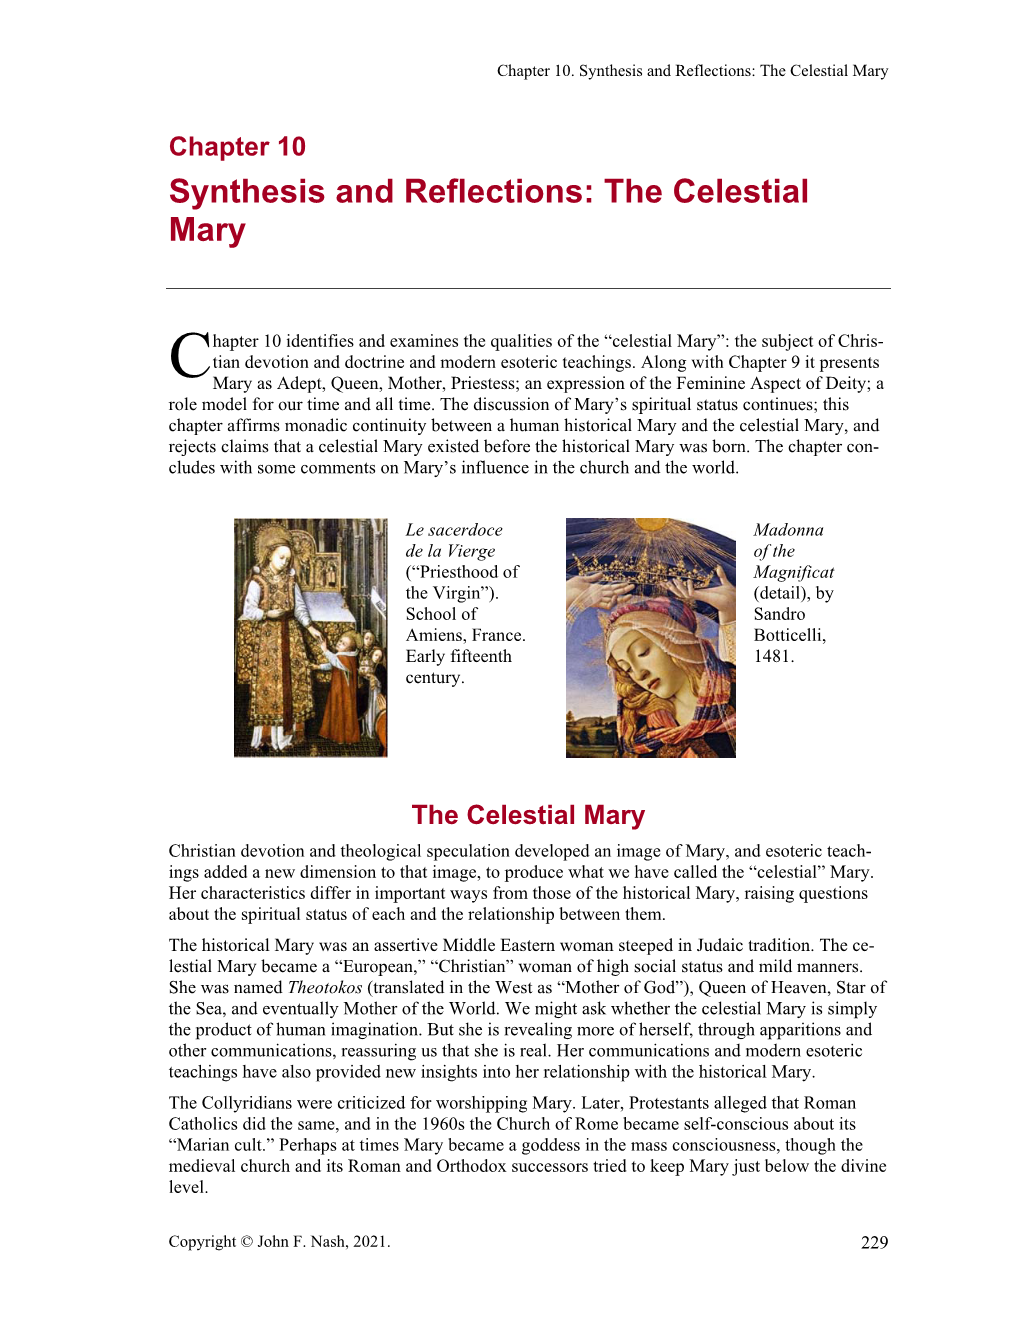 Synthesis and Reflections: the Celestial Mary